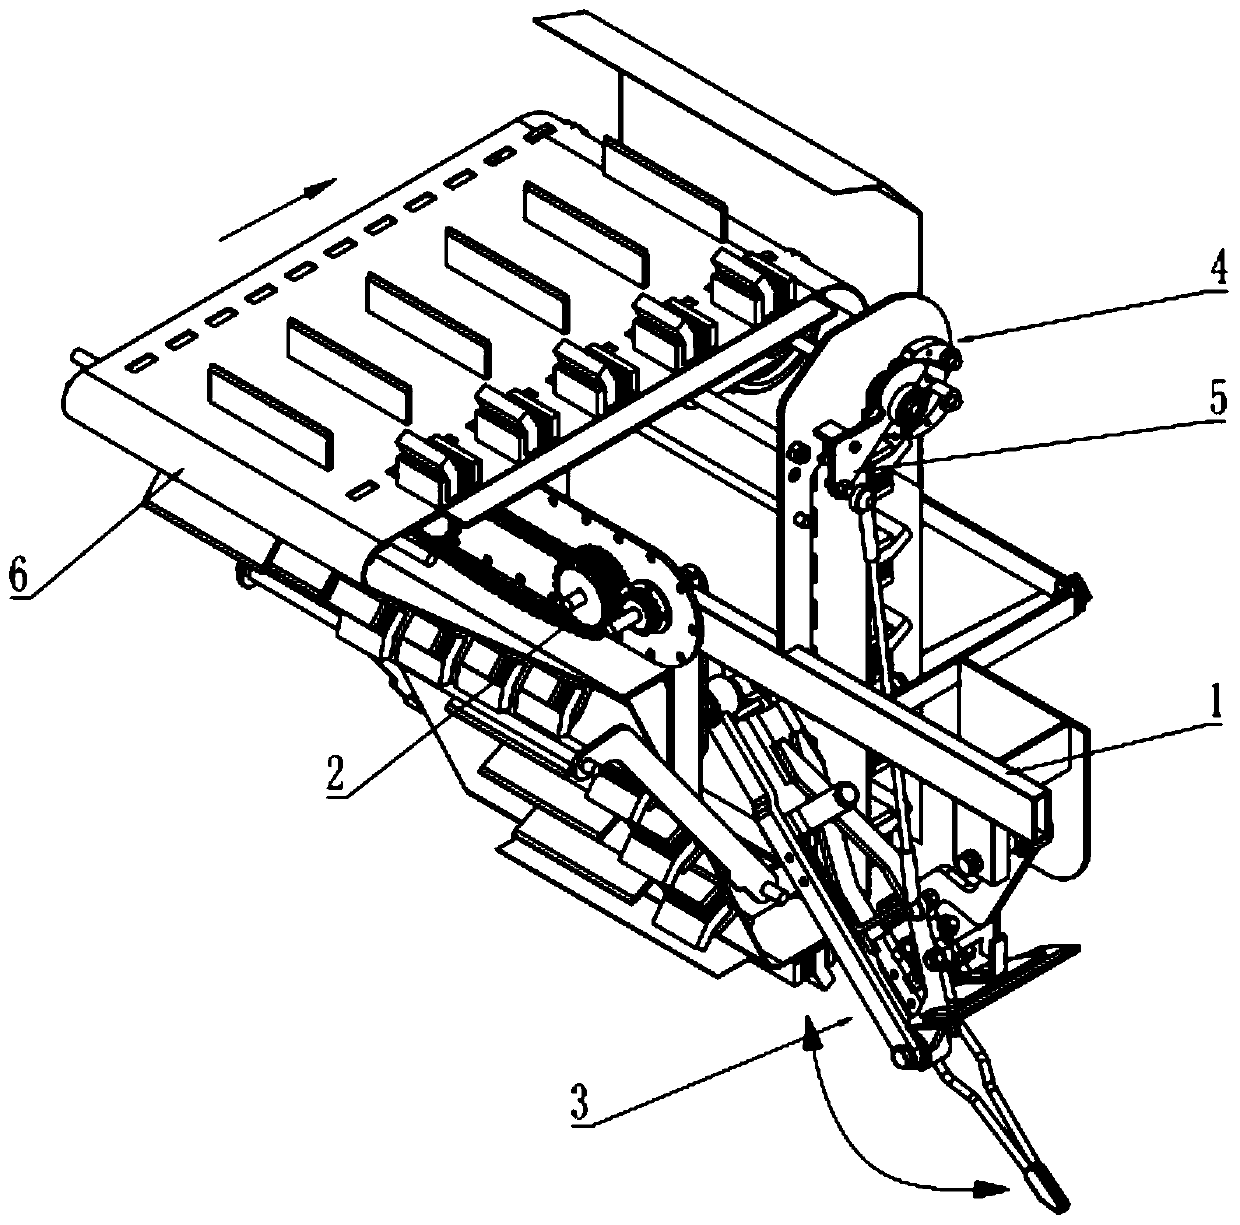 Conveyor belt-clamping type on-membrane inclined planting device for rhizome big seedling crops